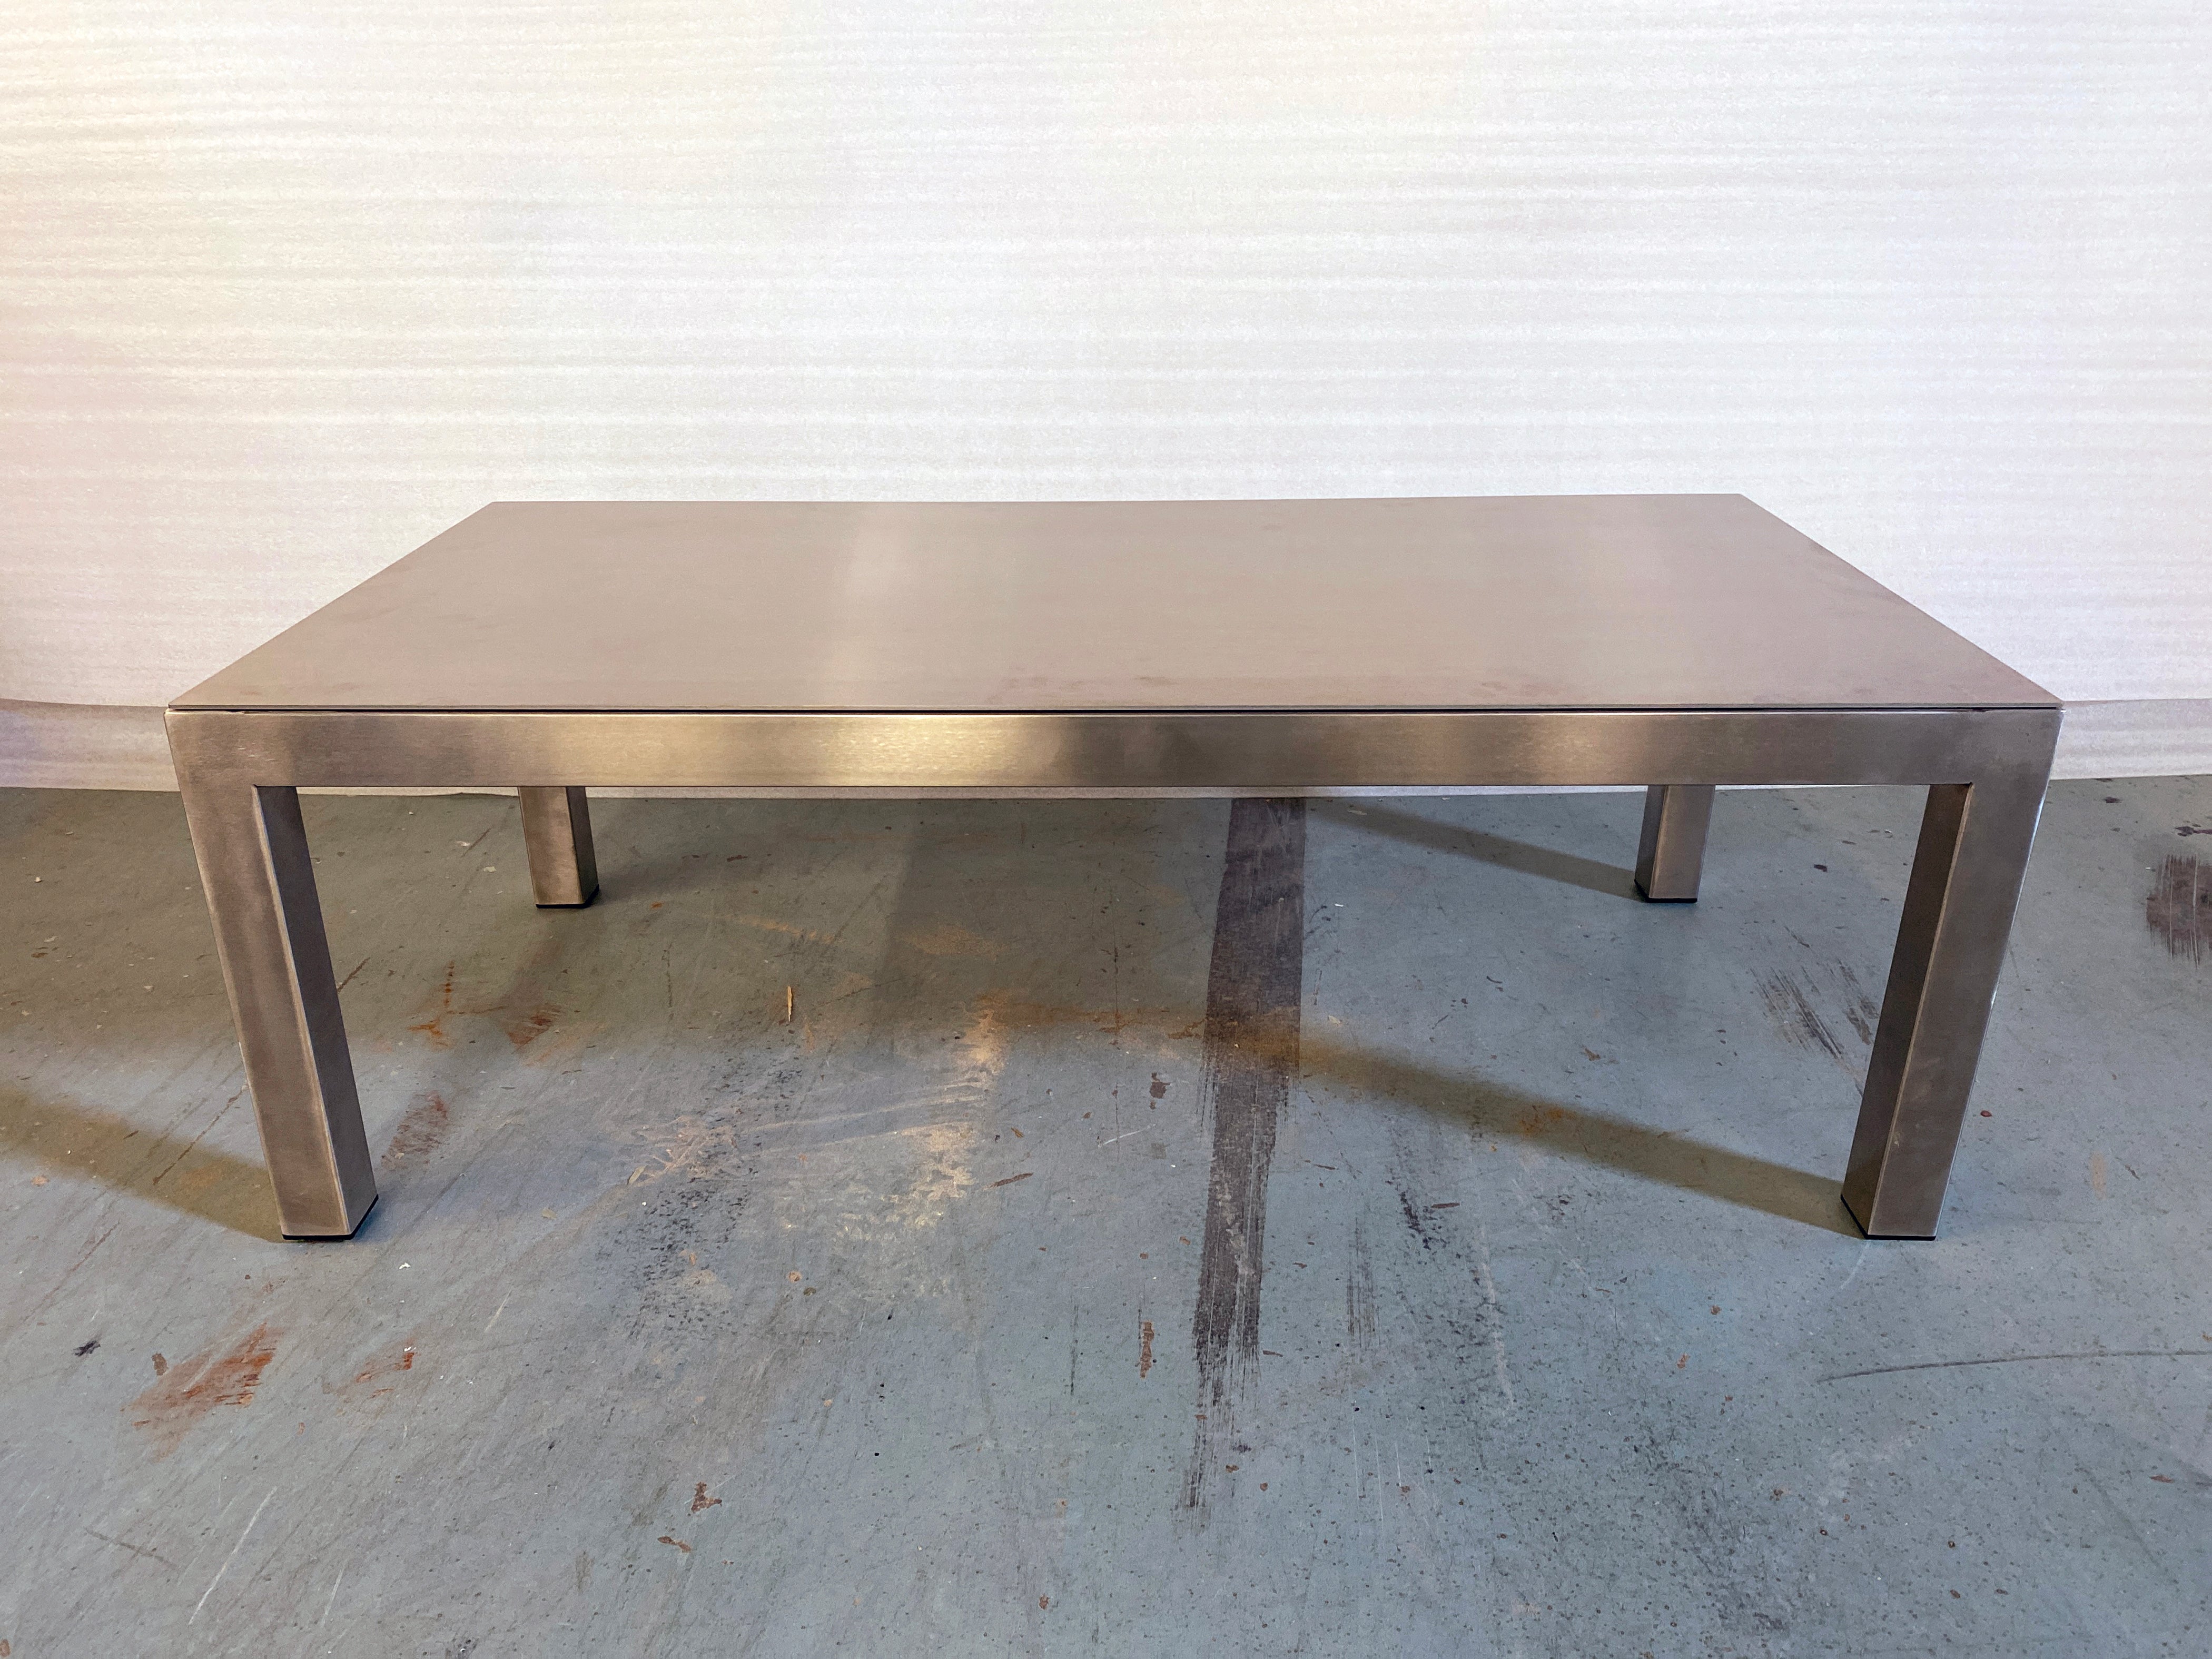 S200 Coffee Table - Stainless Steel